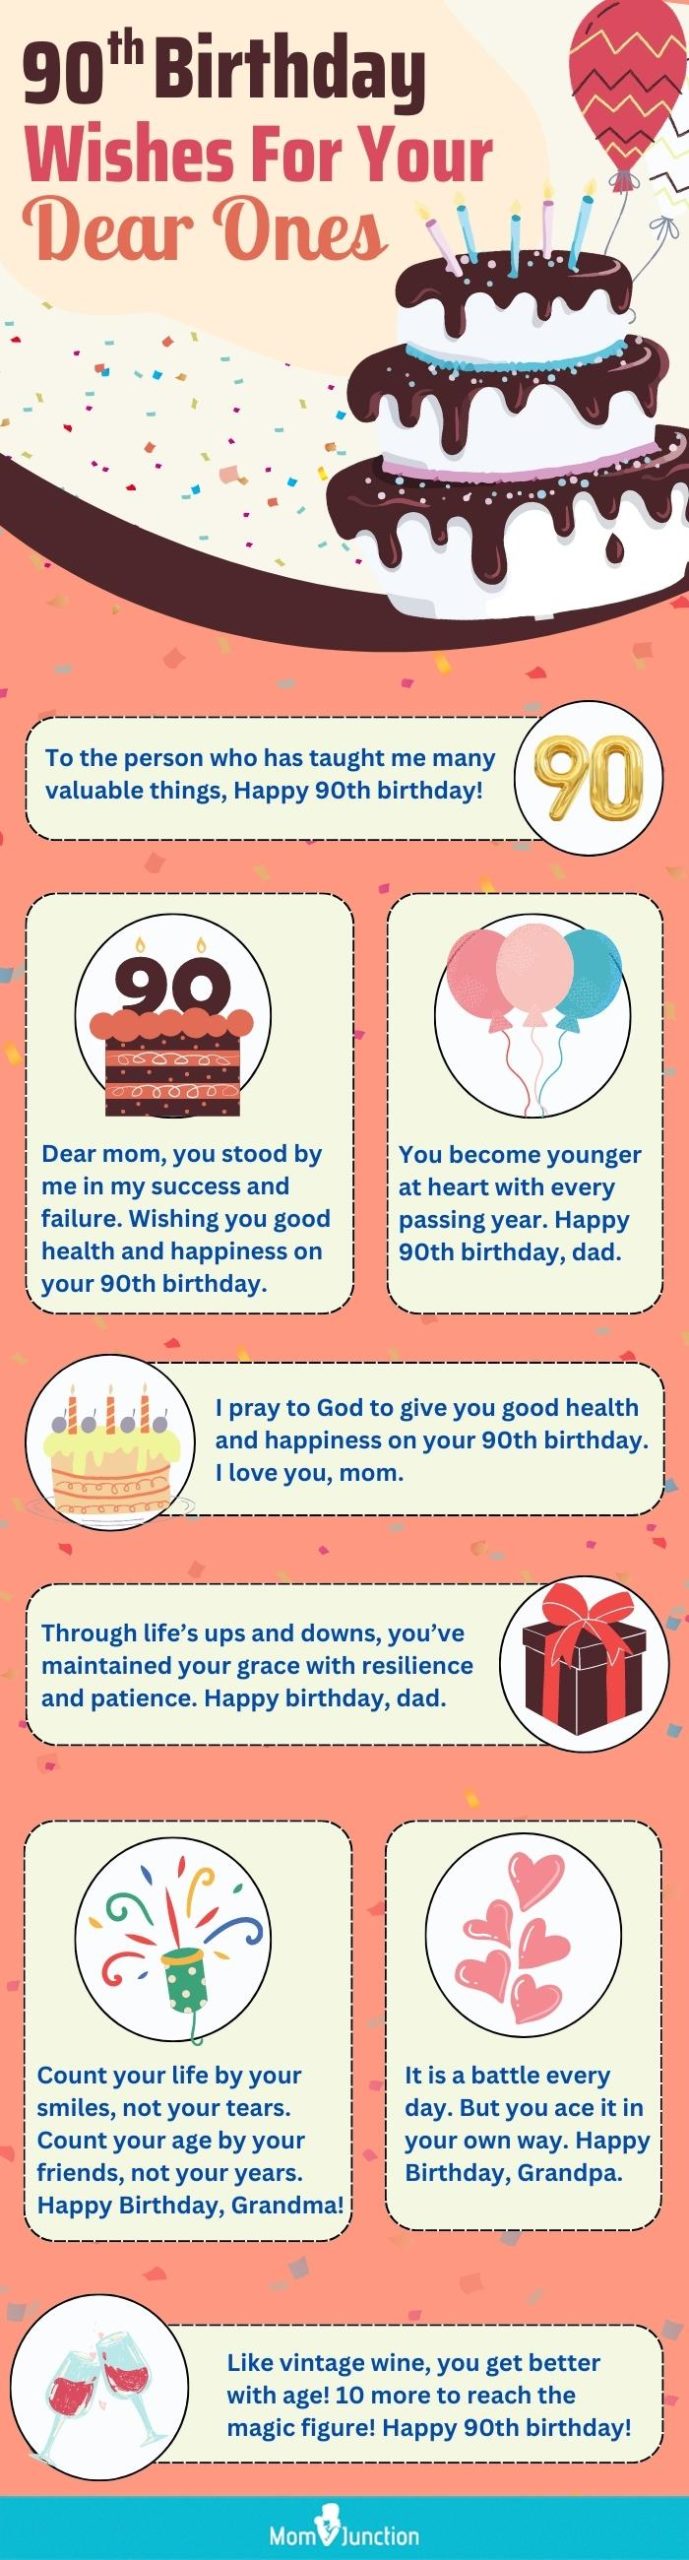 90th birthday wishes for your dear ones (infographic)